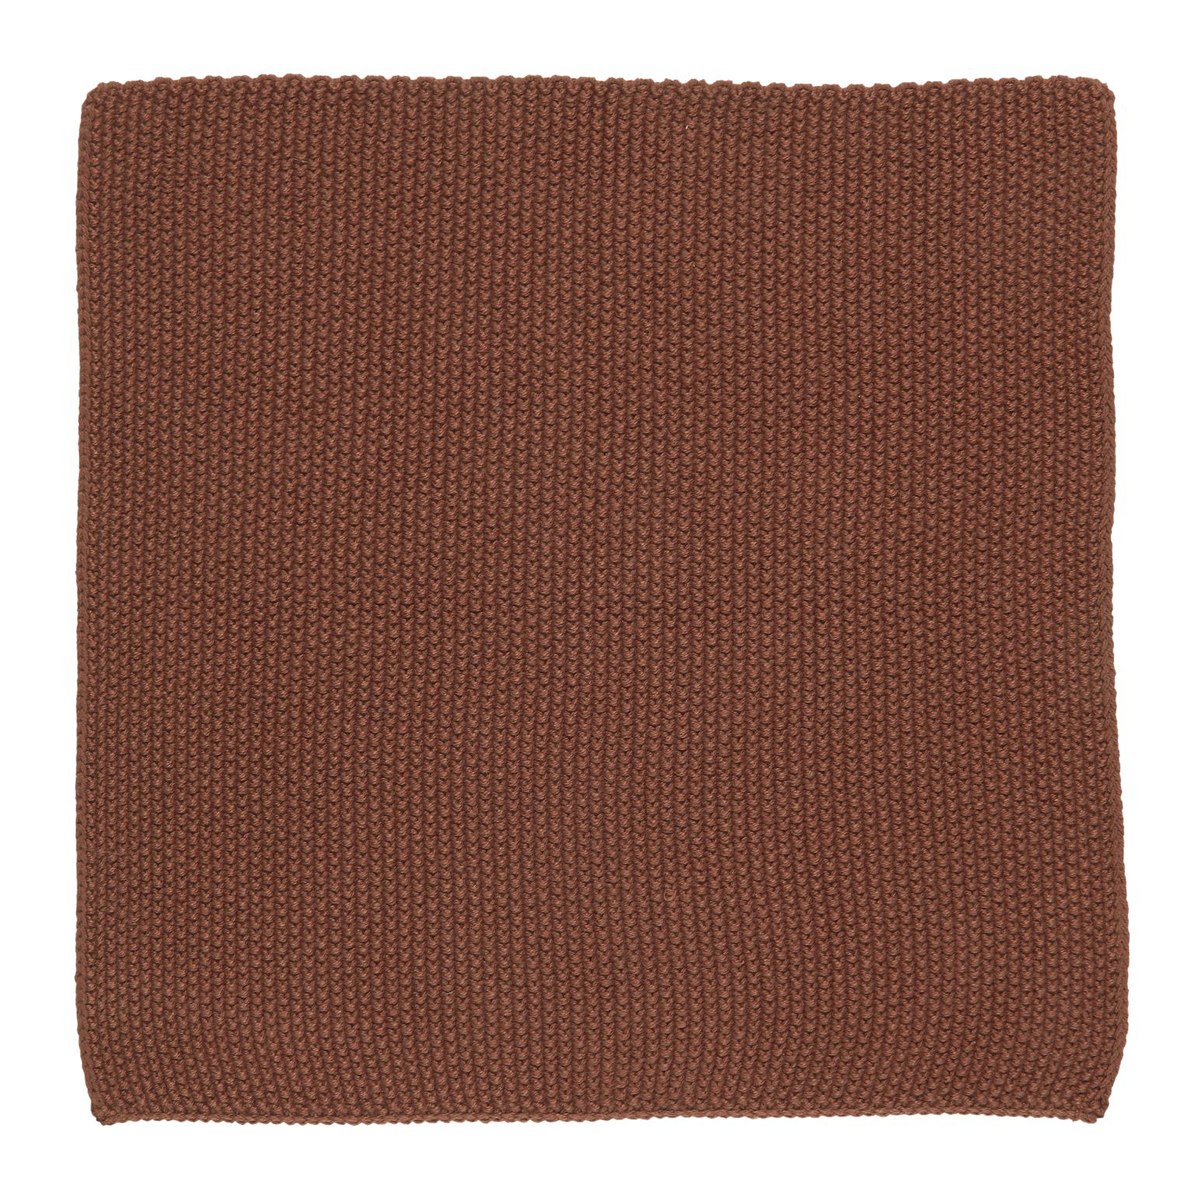 IB laursen Cloth Rustic Brown Knitted